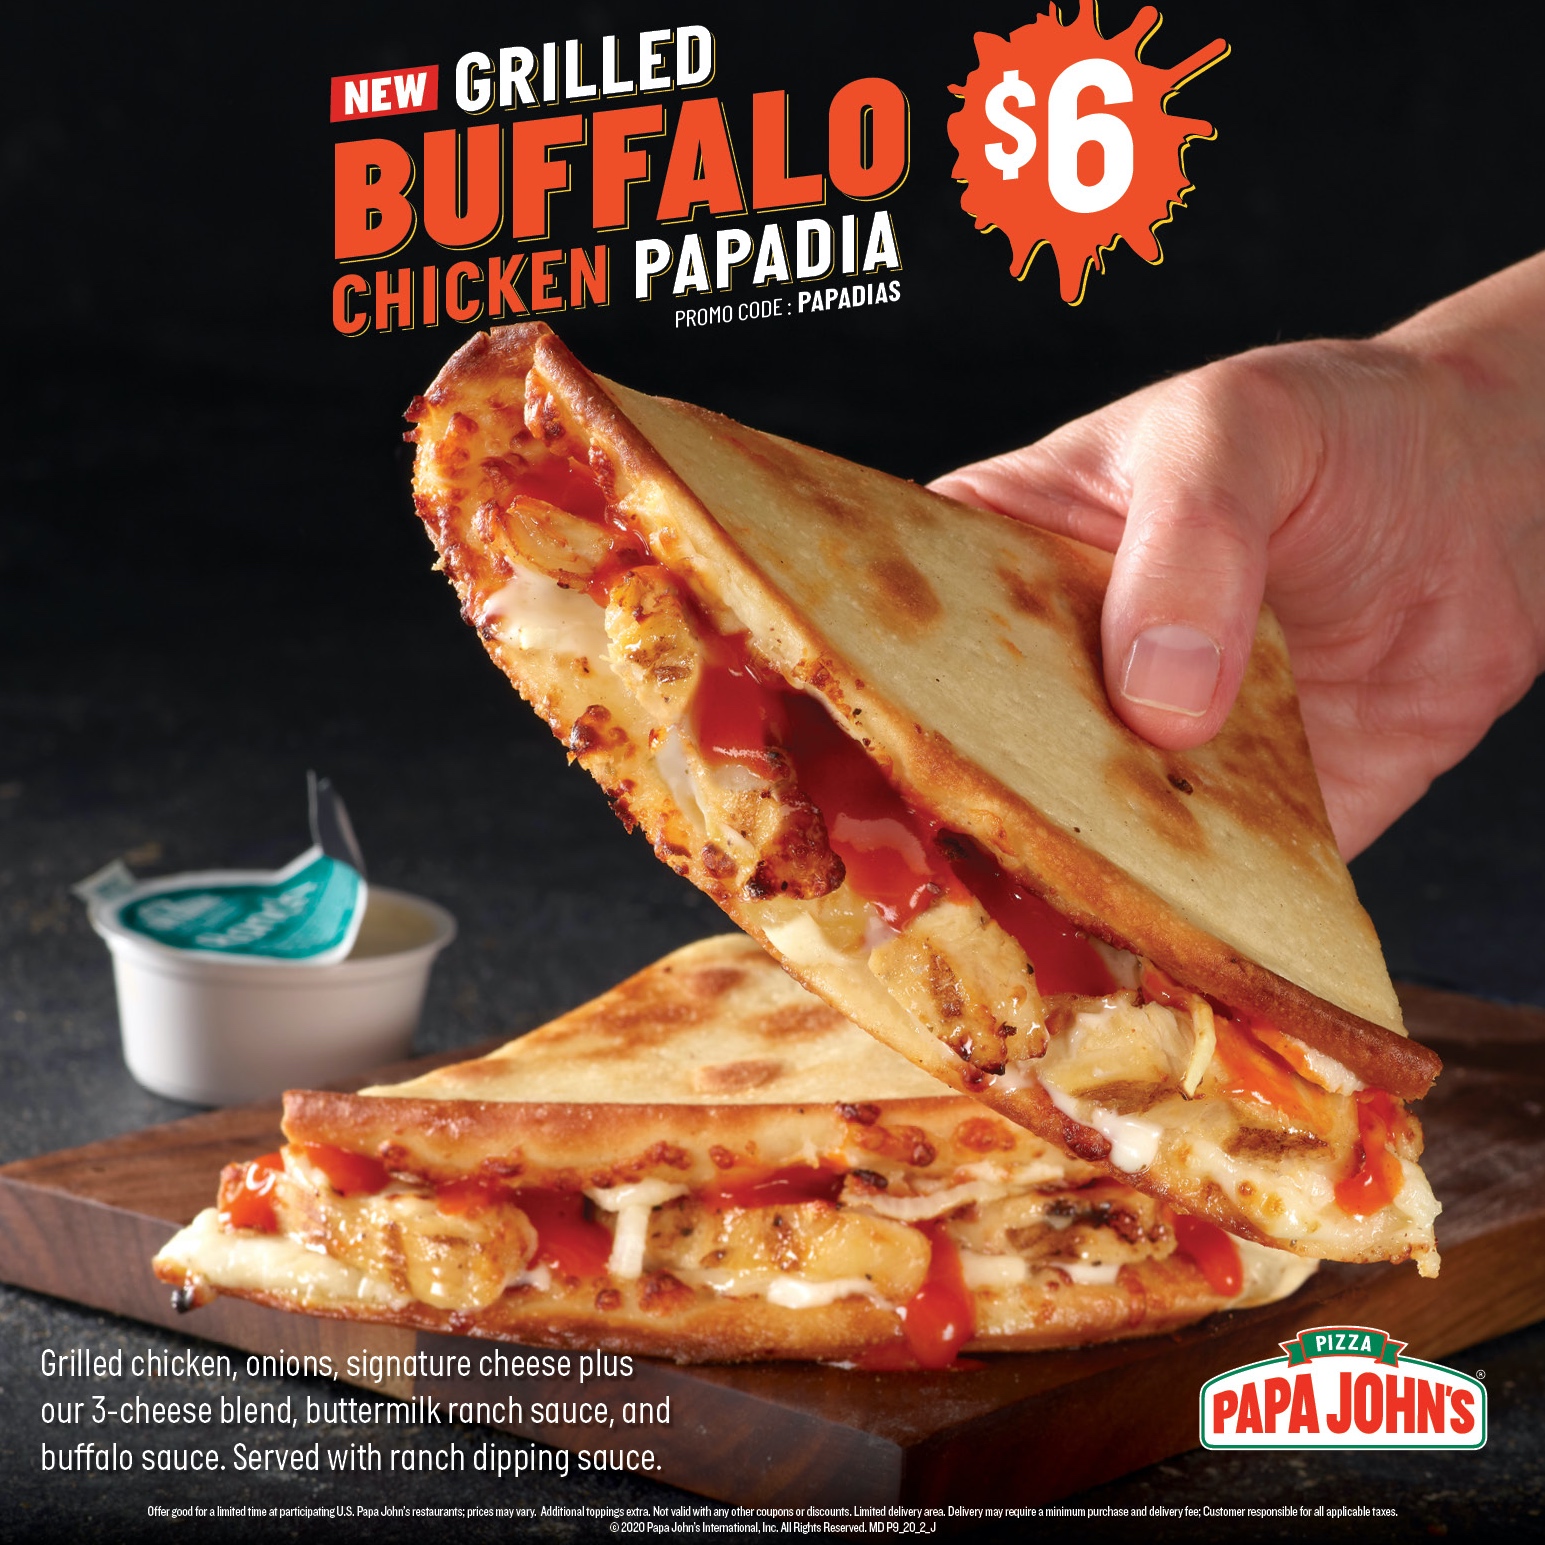 I tried ALL the Papadias from PAPA JOHNS! Which Is The Best